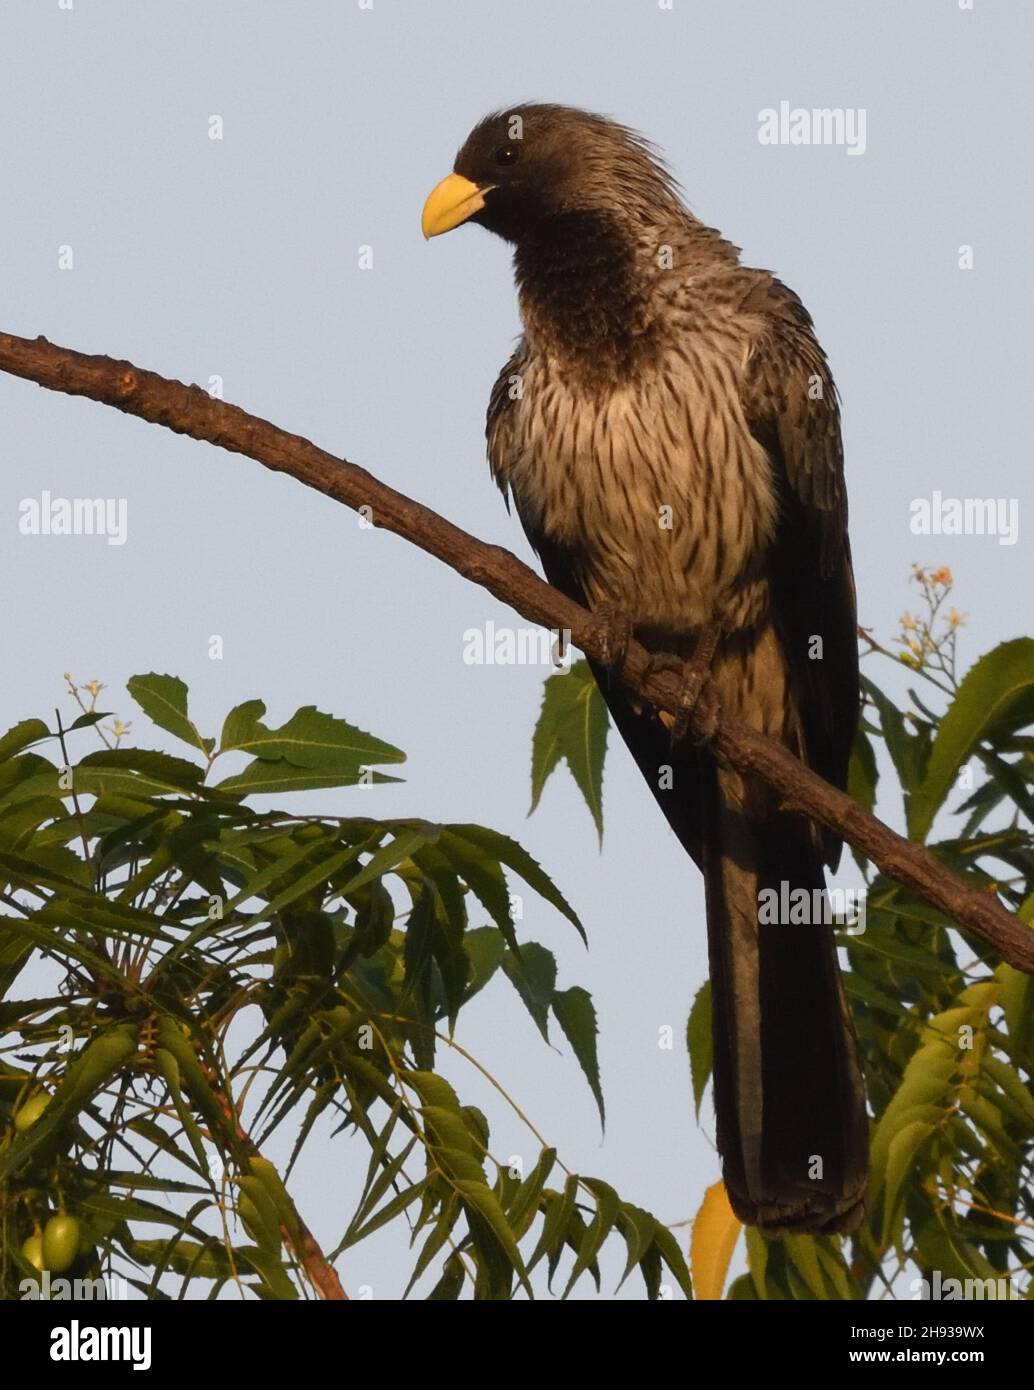 A  western plantain-eater (Crinifer piscator) perches in a tree.    Janjanbureh, The Republic of the Gambia. Stock Photo